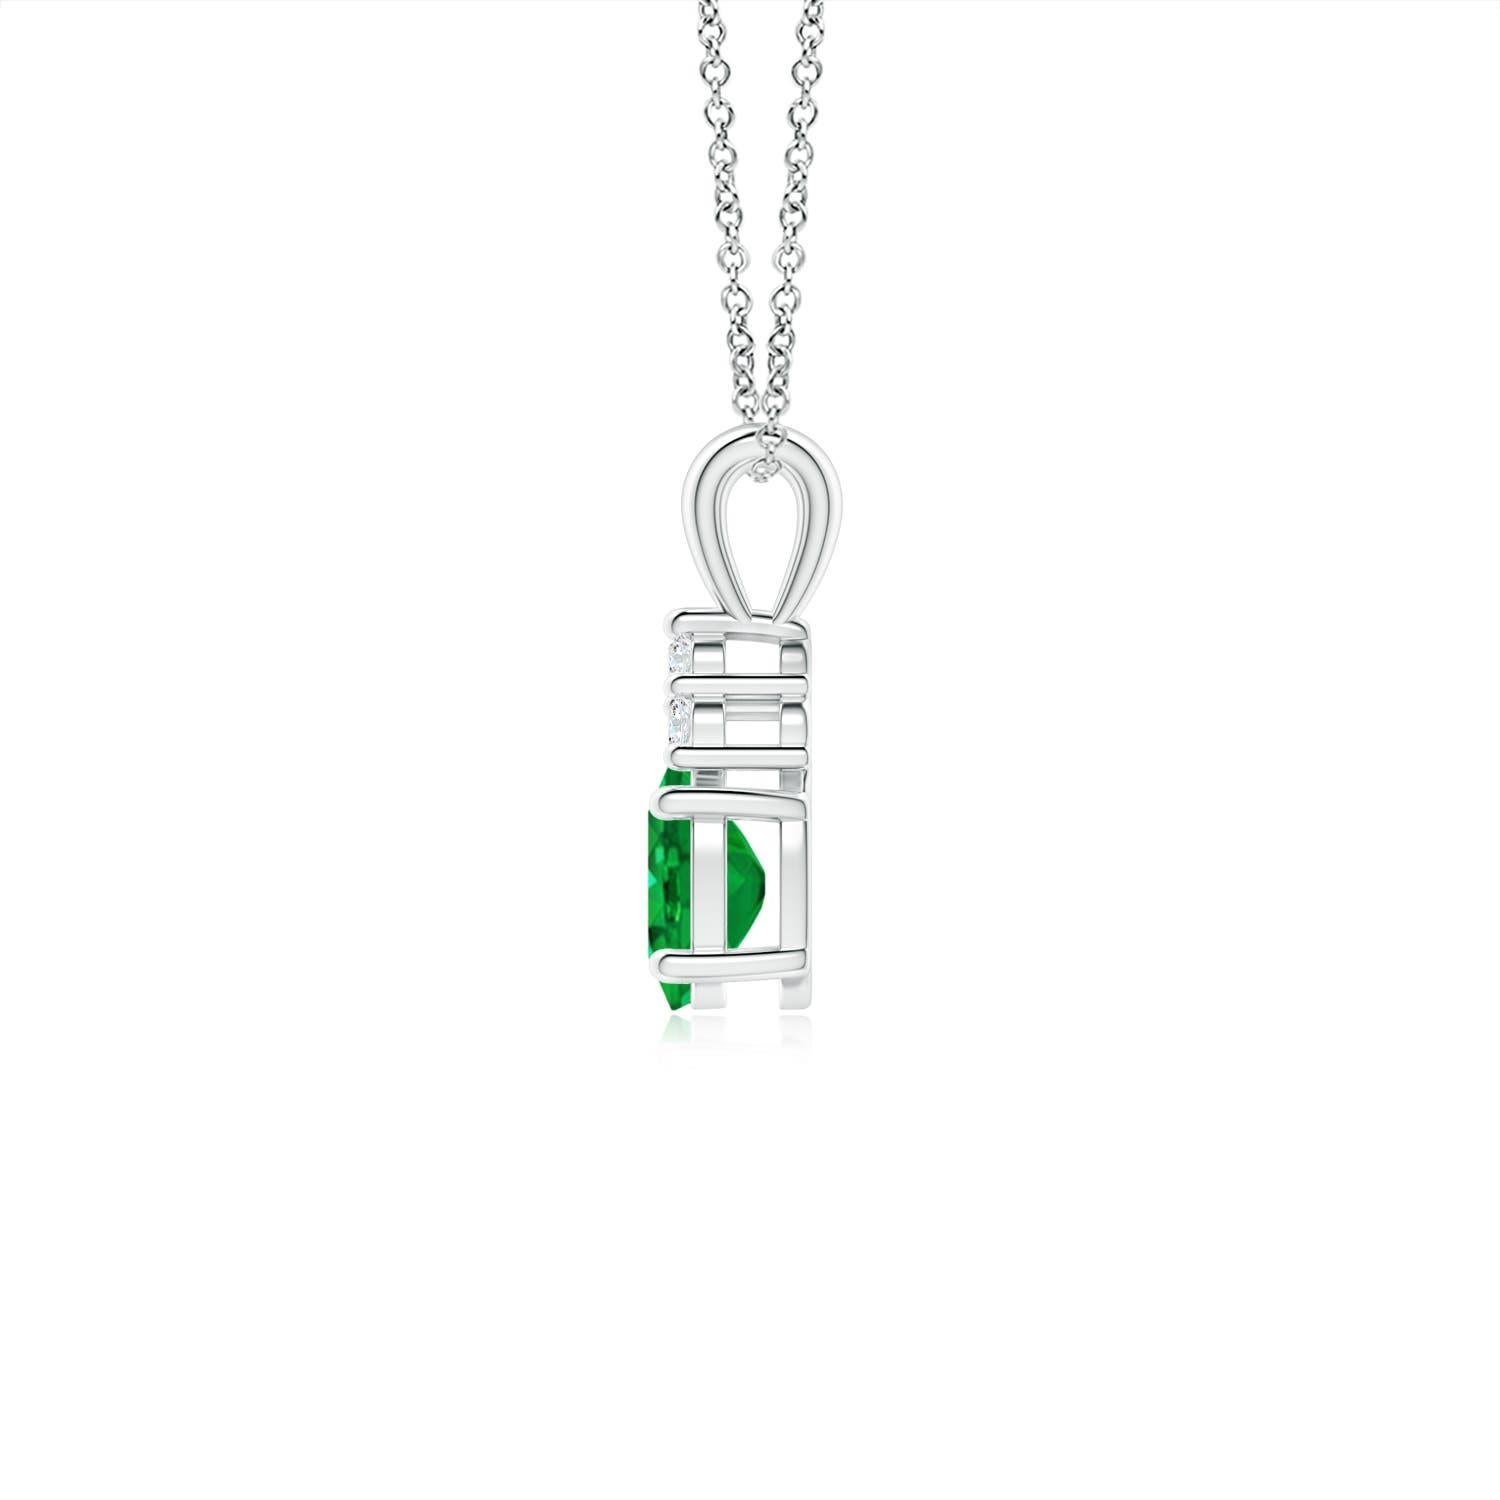 Set in 14k white gold, this classic solitaire emerald pendant showcases the perfect blend of style and elegance. It features a lush green emerald adorned with three sparkling round diamonds on the top. Linked to a lustrous v-bale, this four-prong